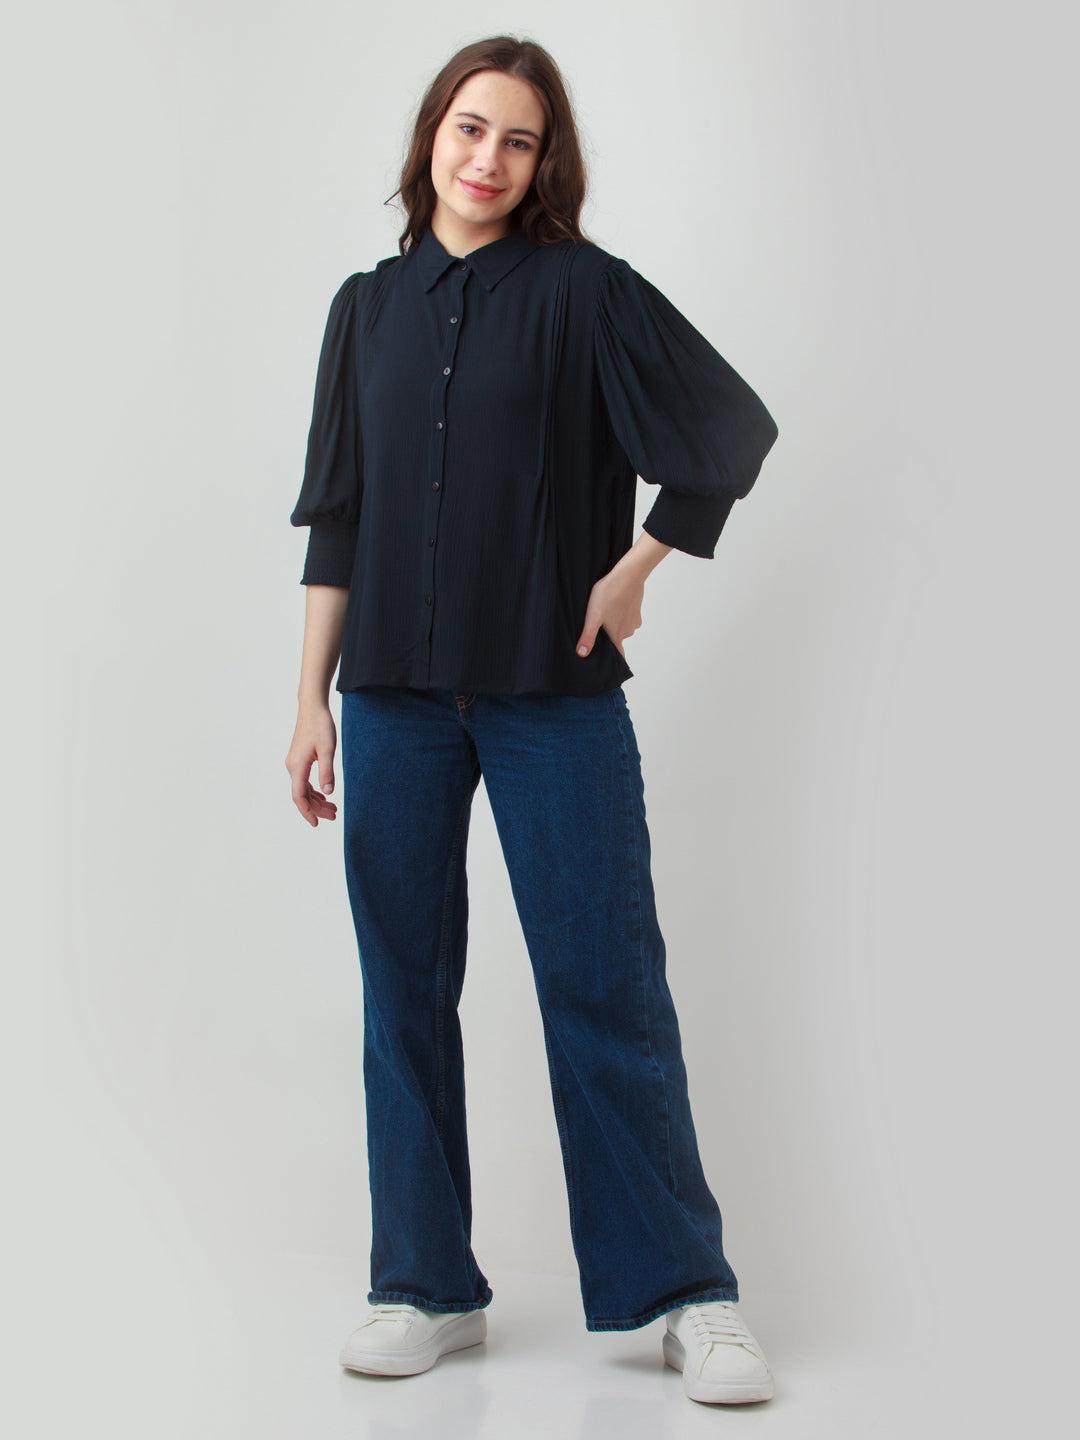 black solid shirt for women